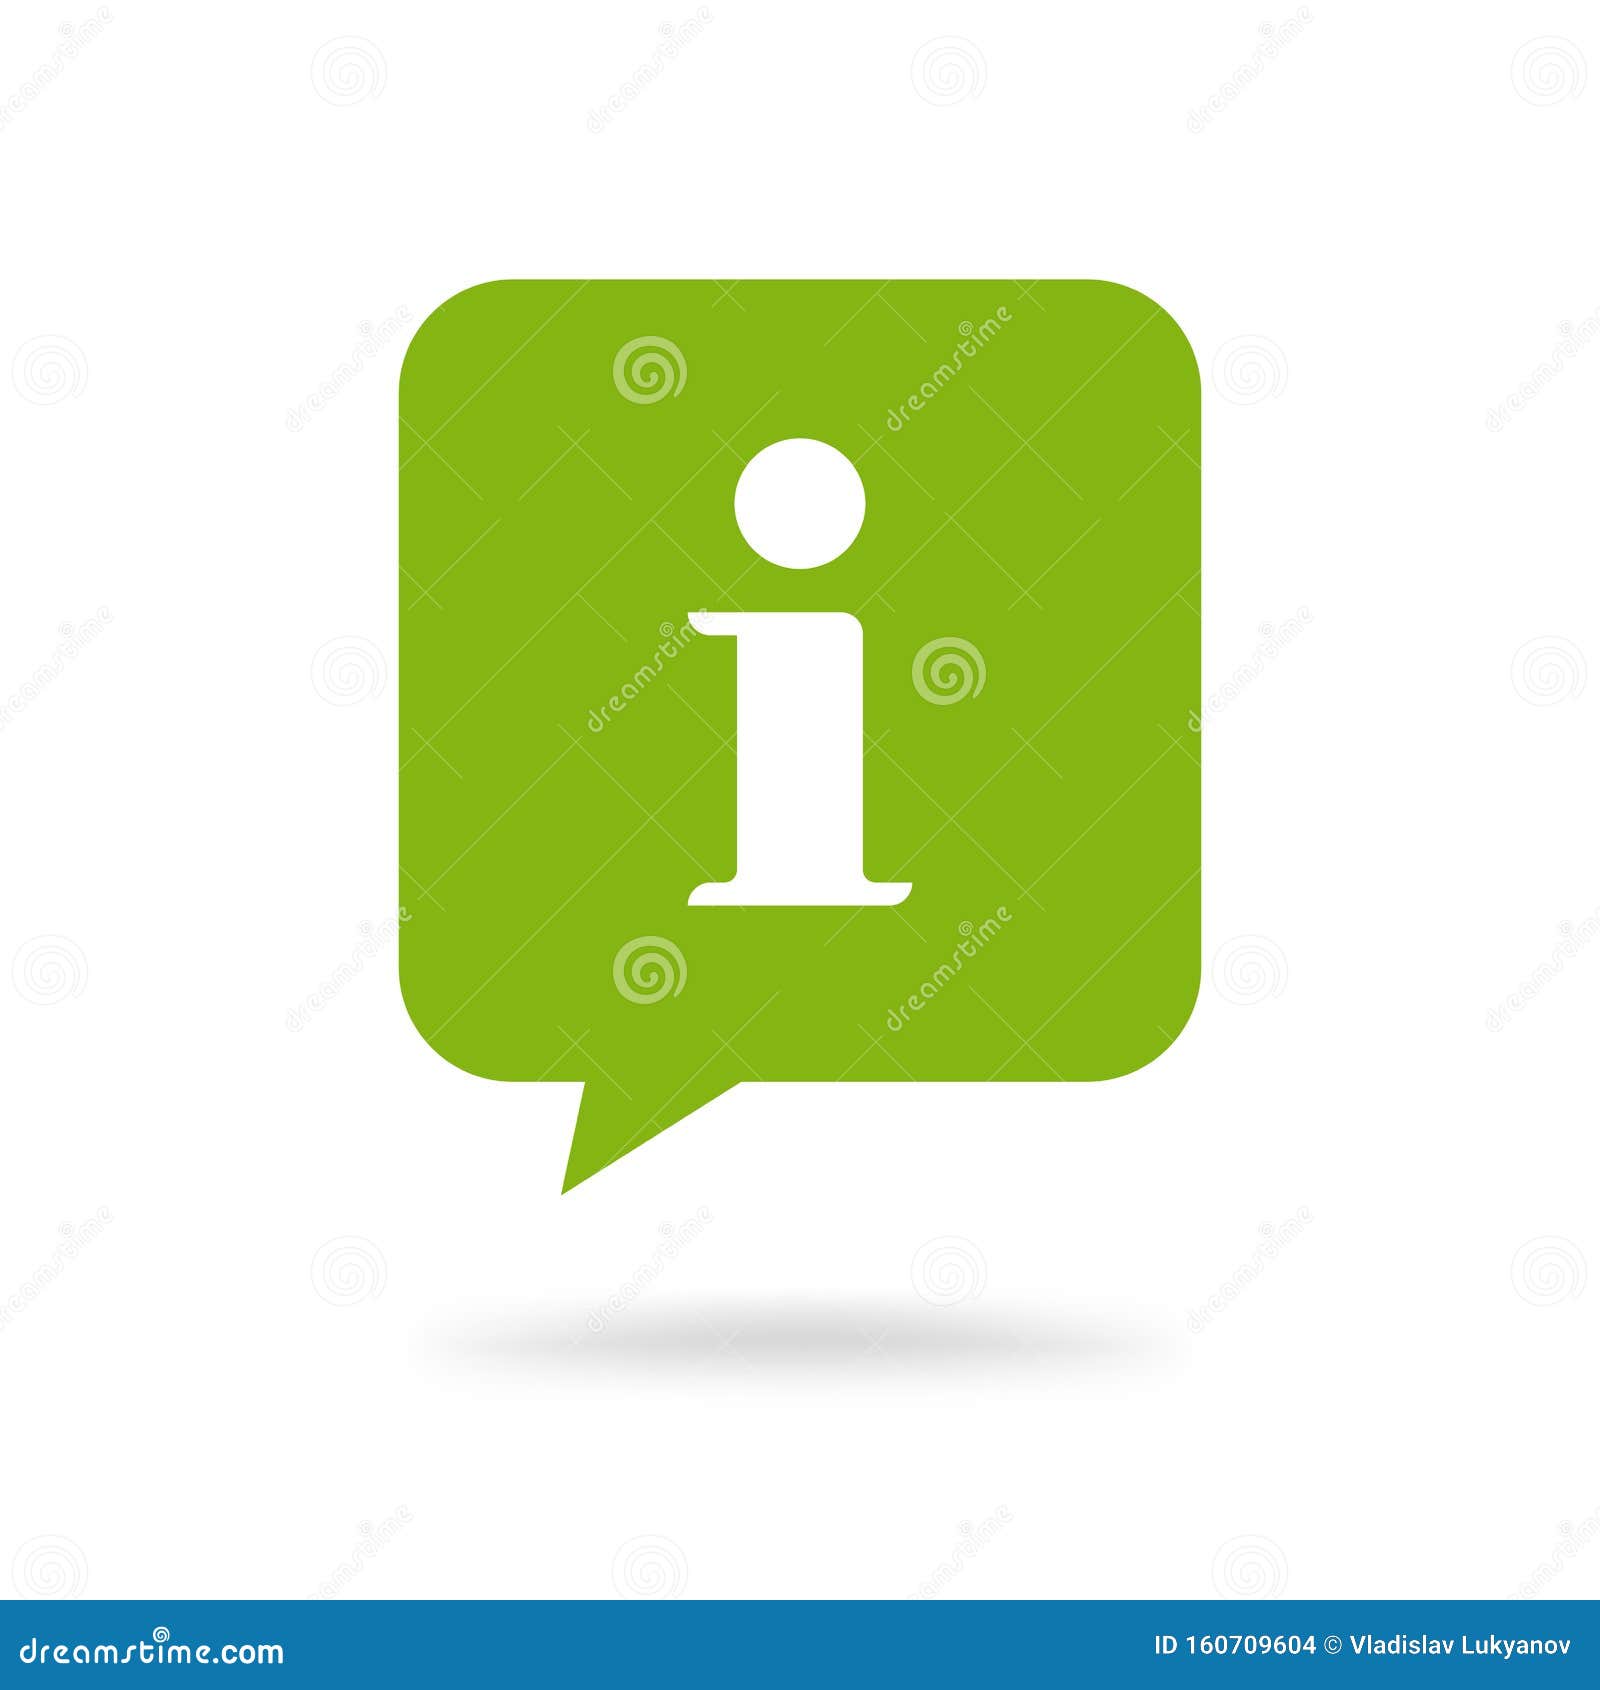 info help sign icon  , flat green square information bubble speech mark  pictogram clipart